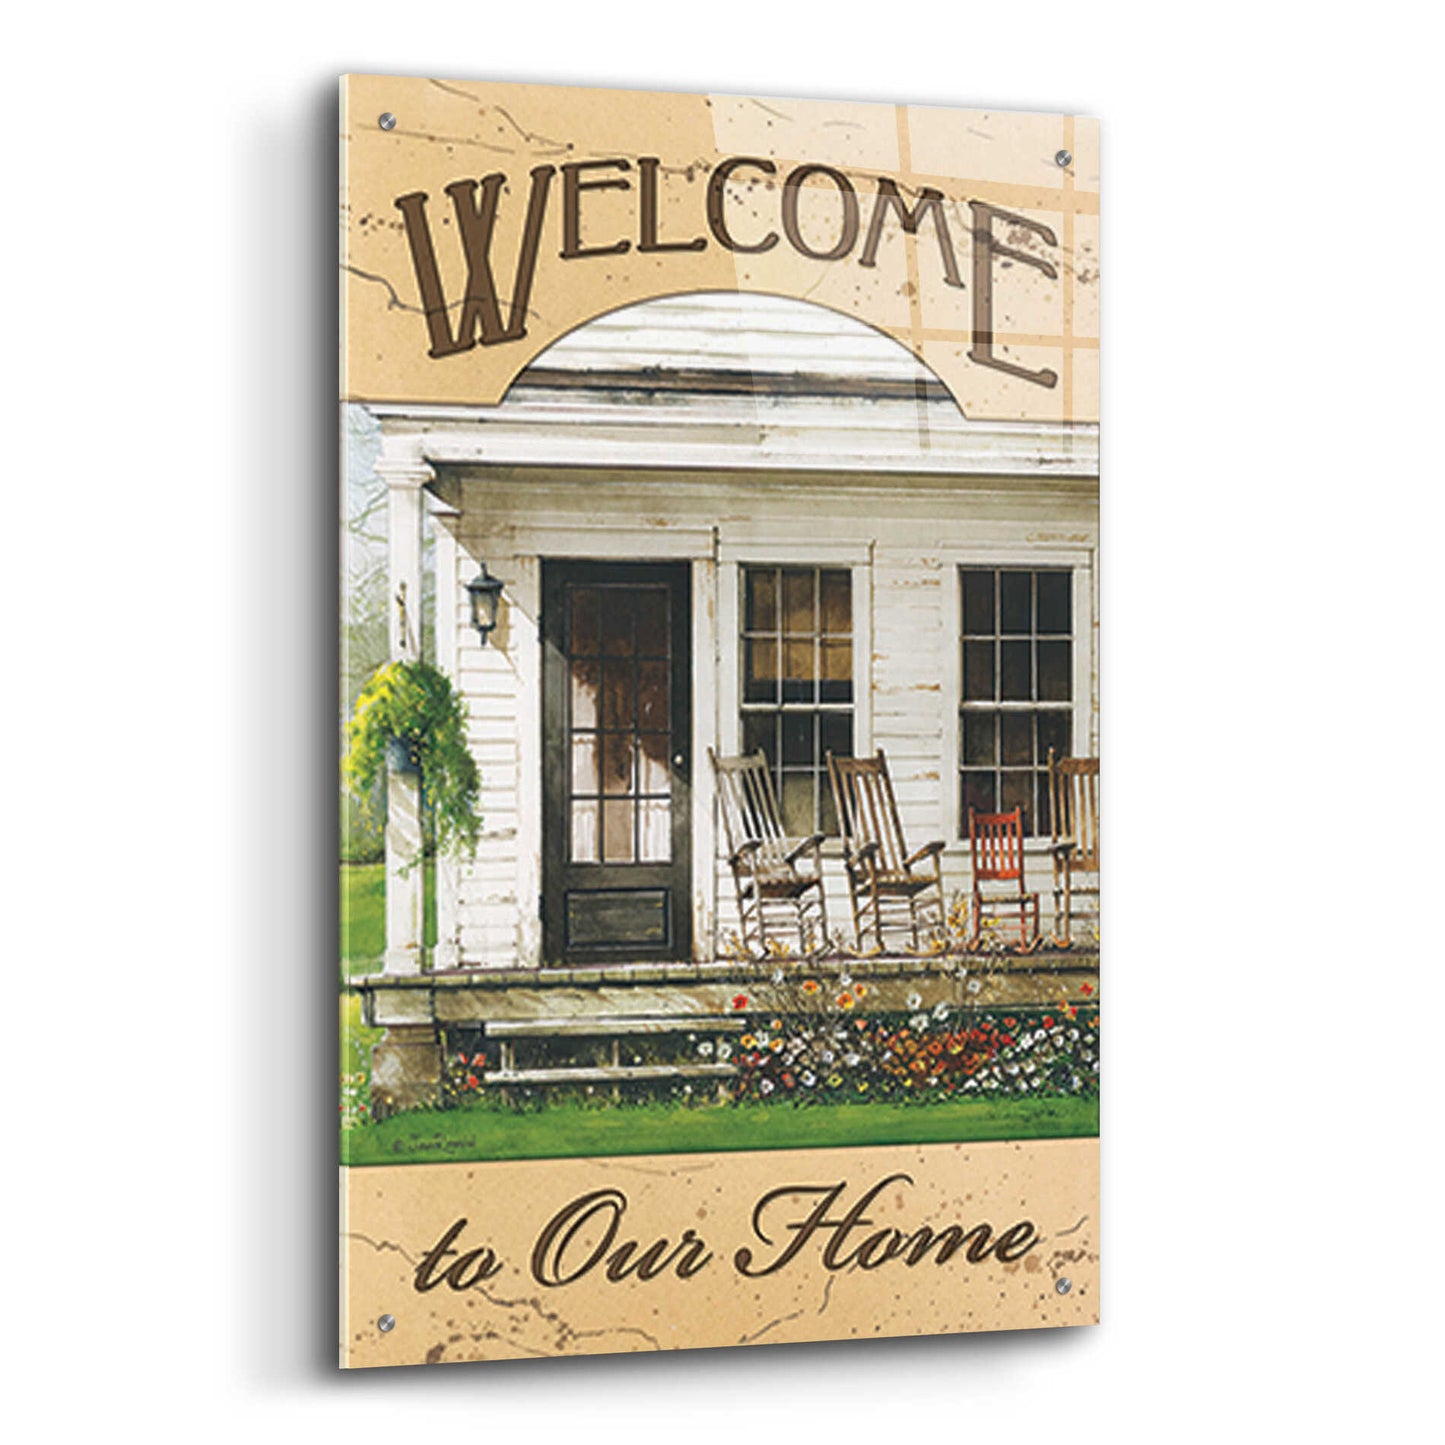 Epic Art 'Welcome to Our Home' by John Rossini, Acrylic Glass Wall Art,24x36